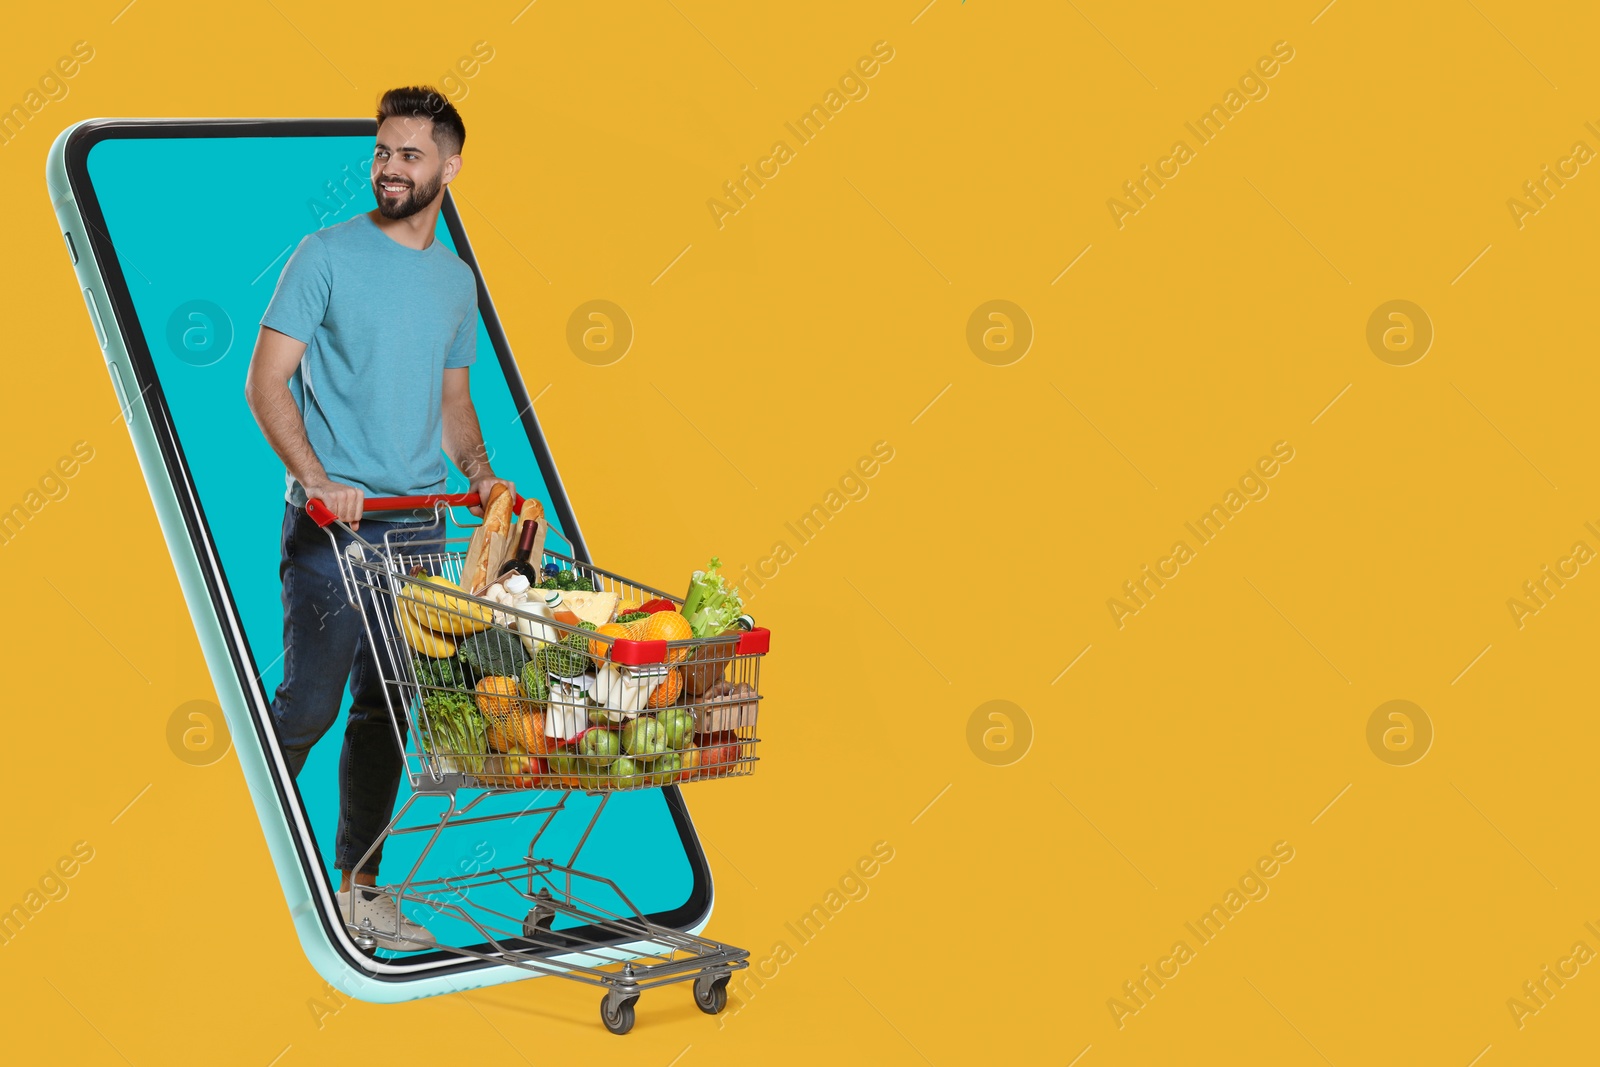 Image of Grocery shopping via internet. Happy man with shopping cart full of products walking out of huge smartphone on orange background, space for text